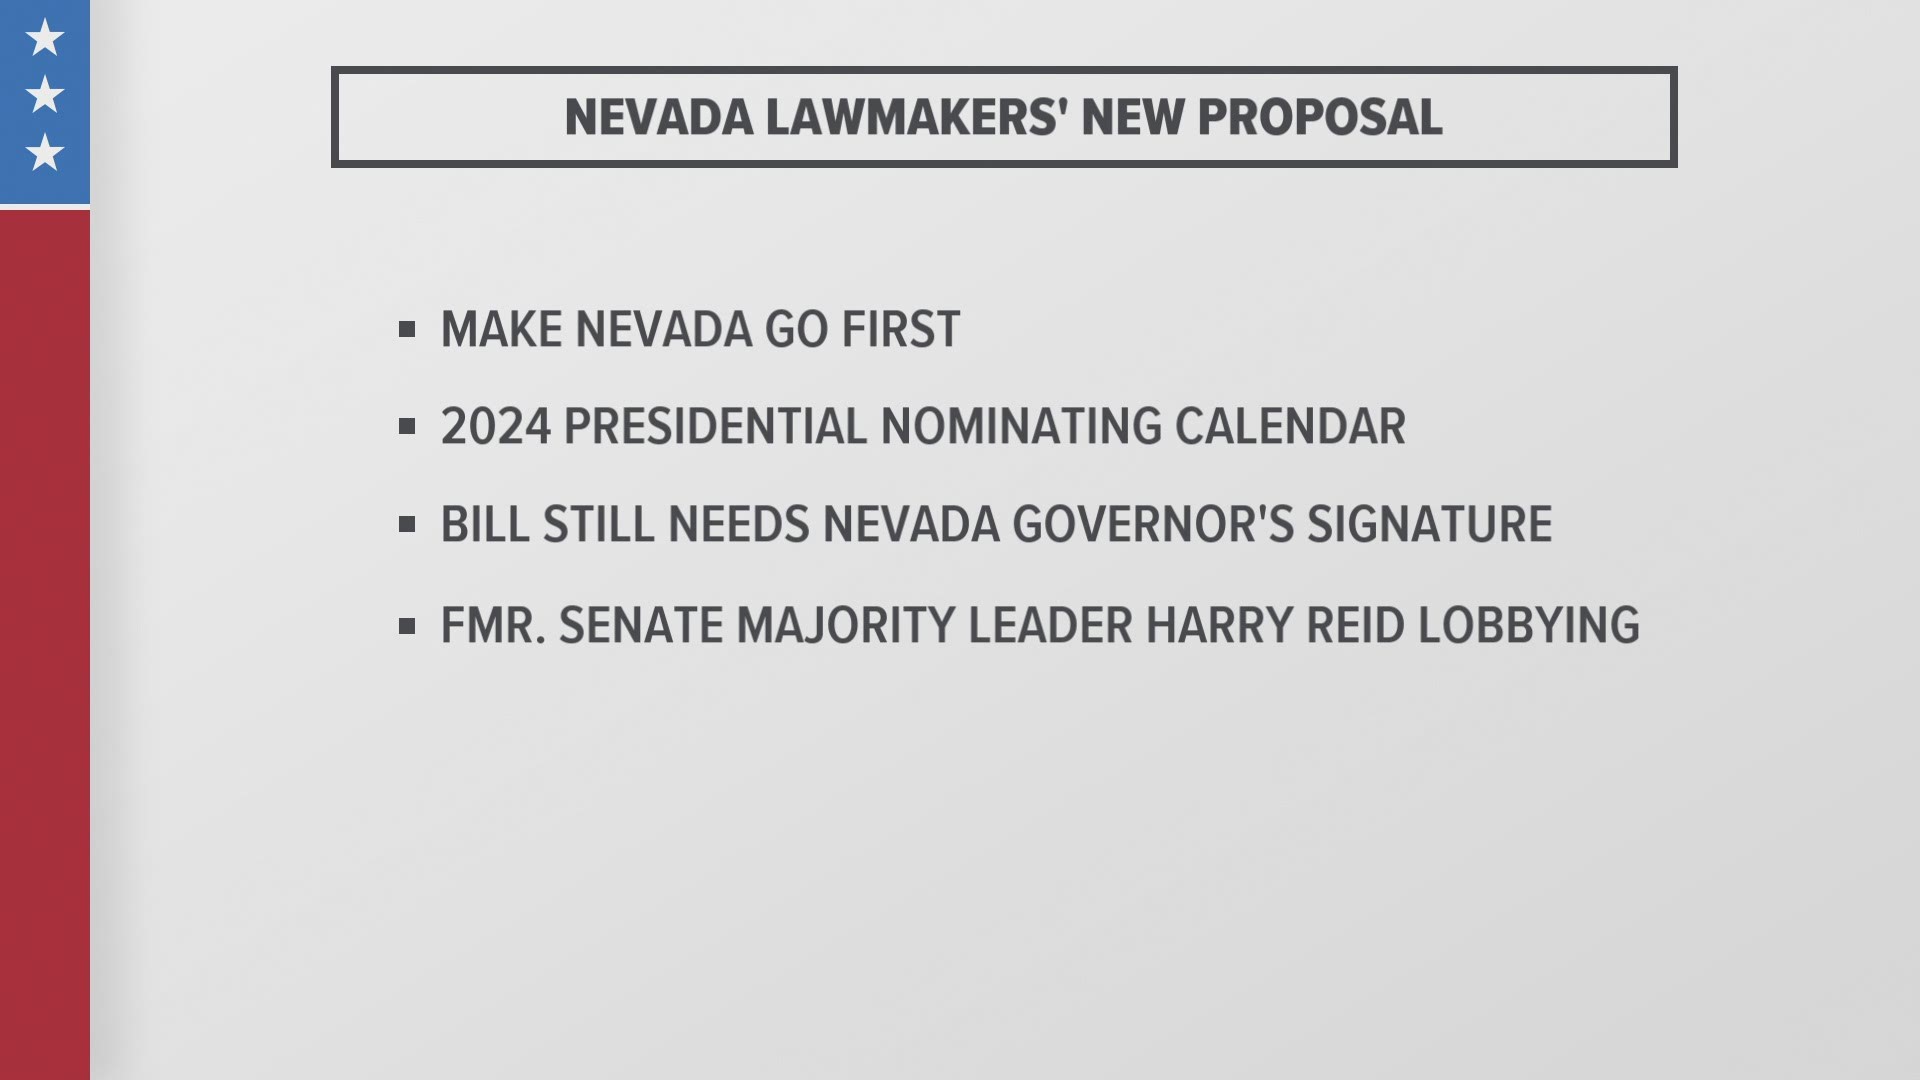 Nevada's bill still needs to be approved by Democratic Gov. Steve Sisolak to become law, It also needs backing of the national parties.